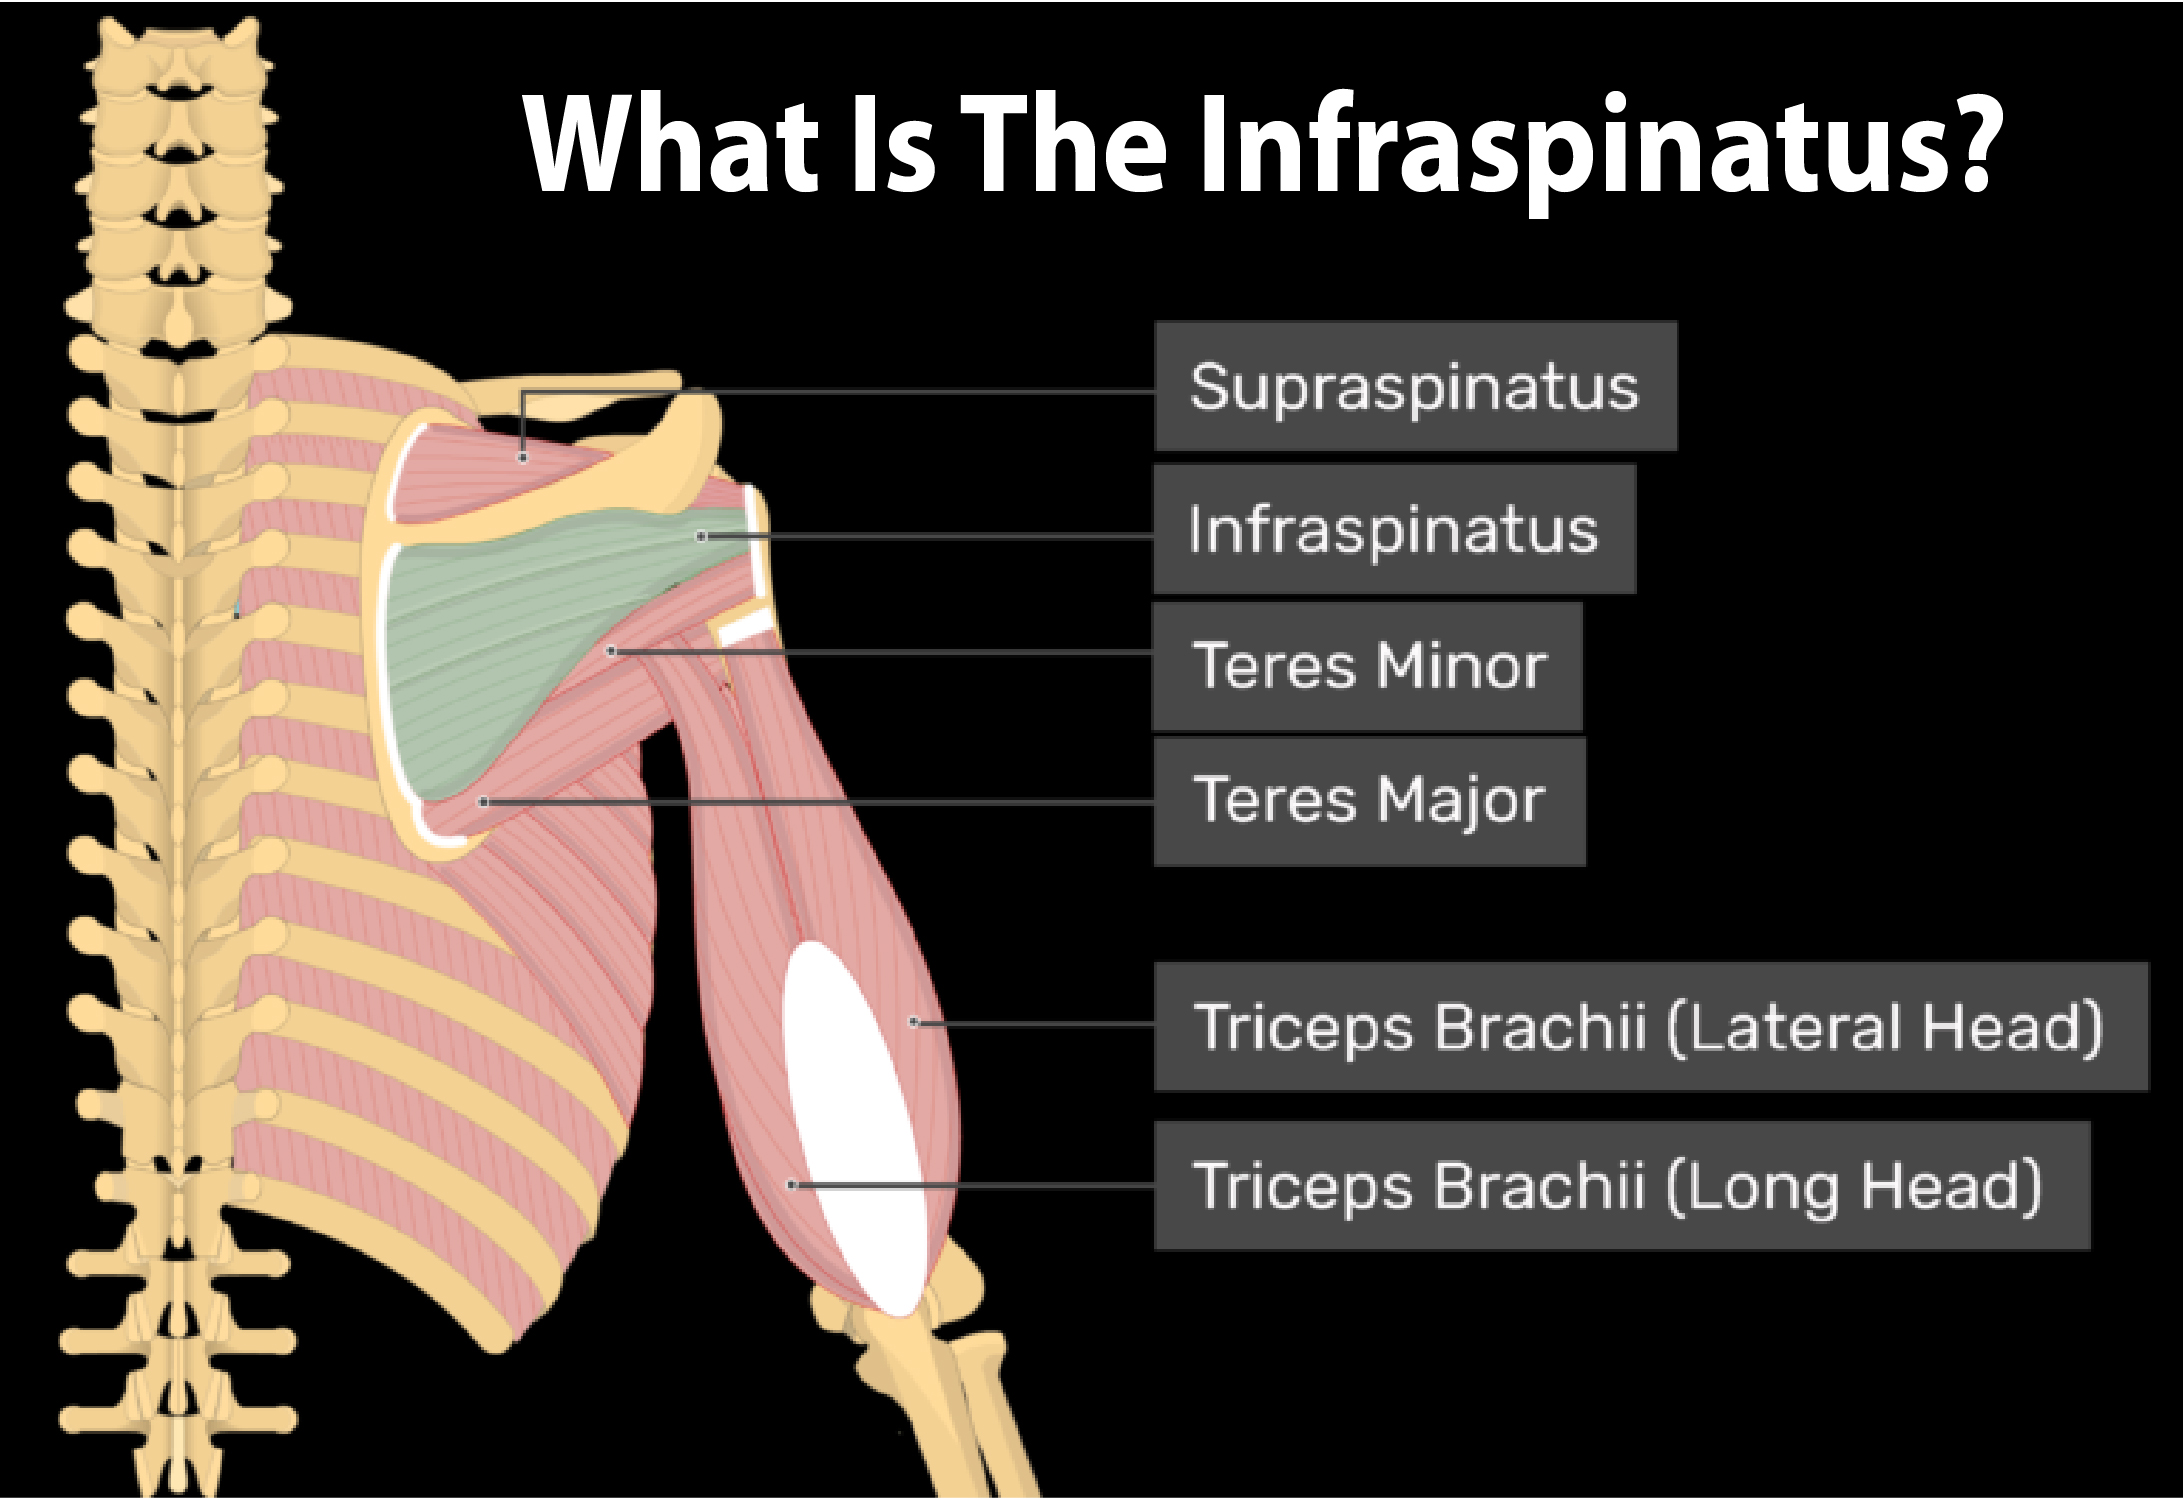 What Is The Infraspinatus?